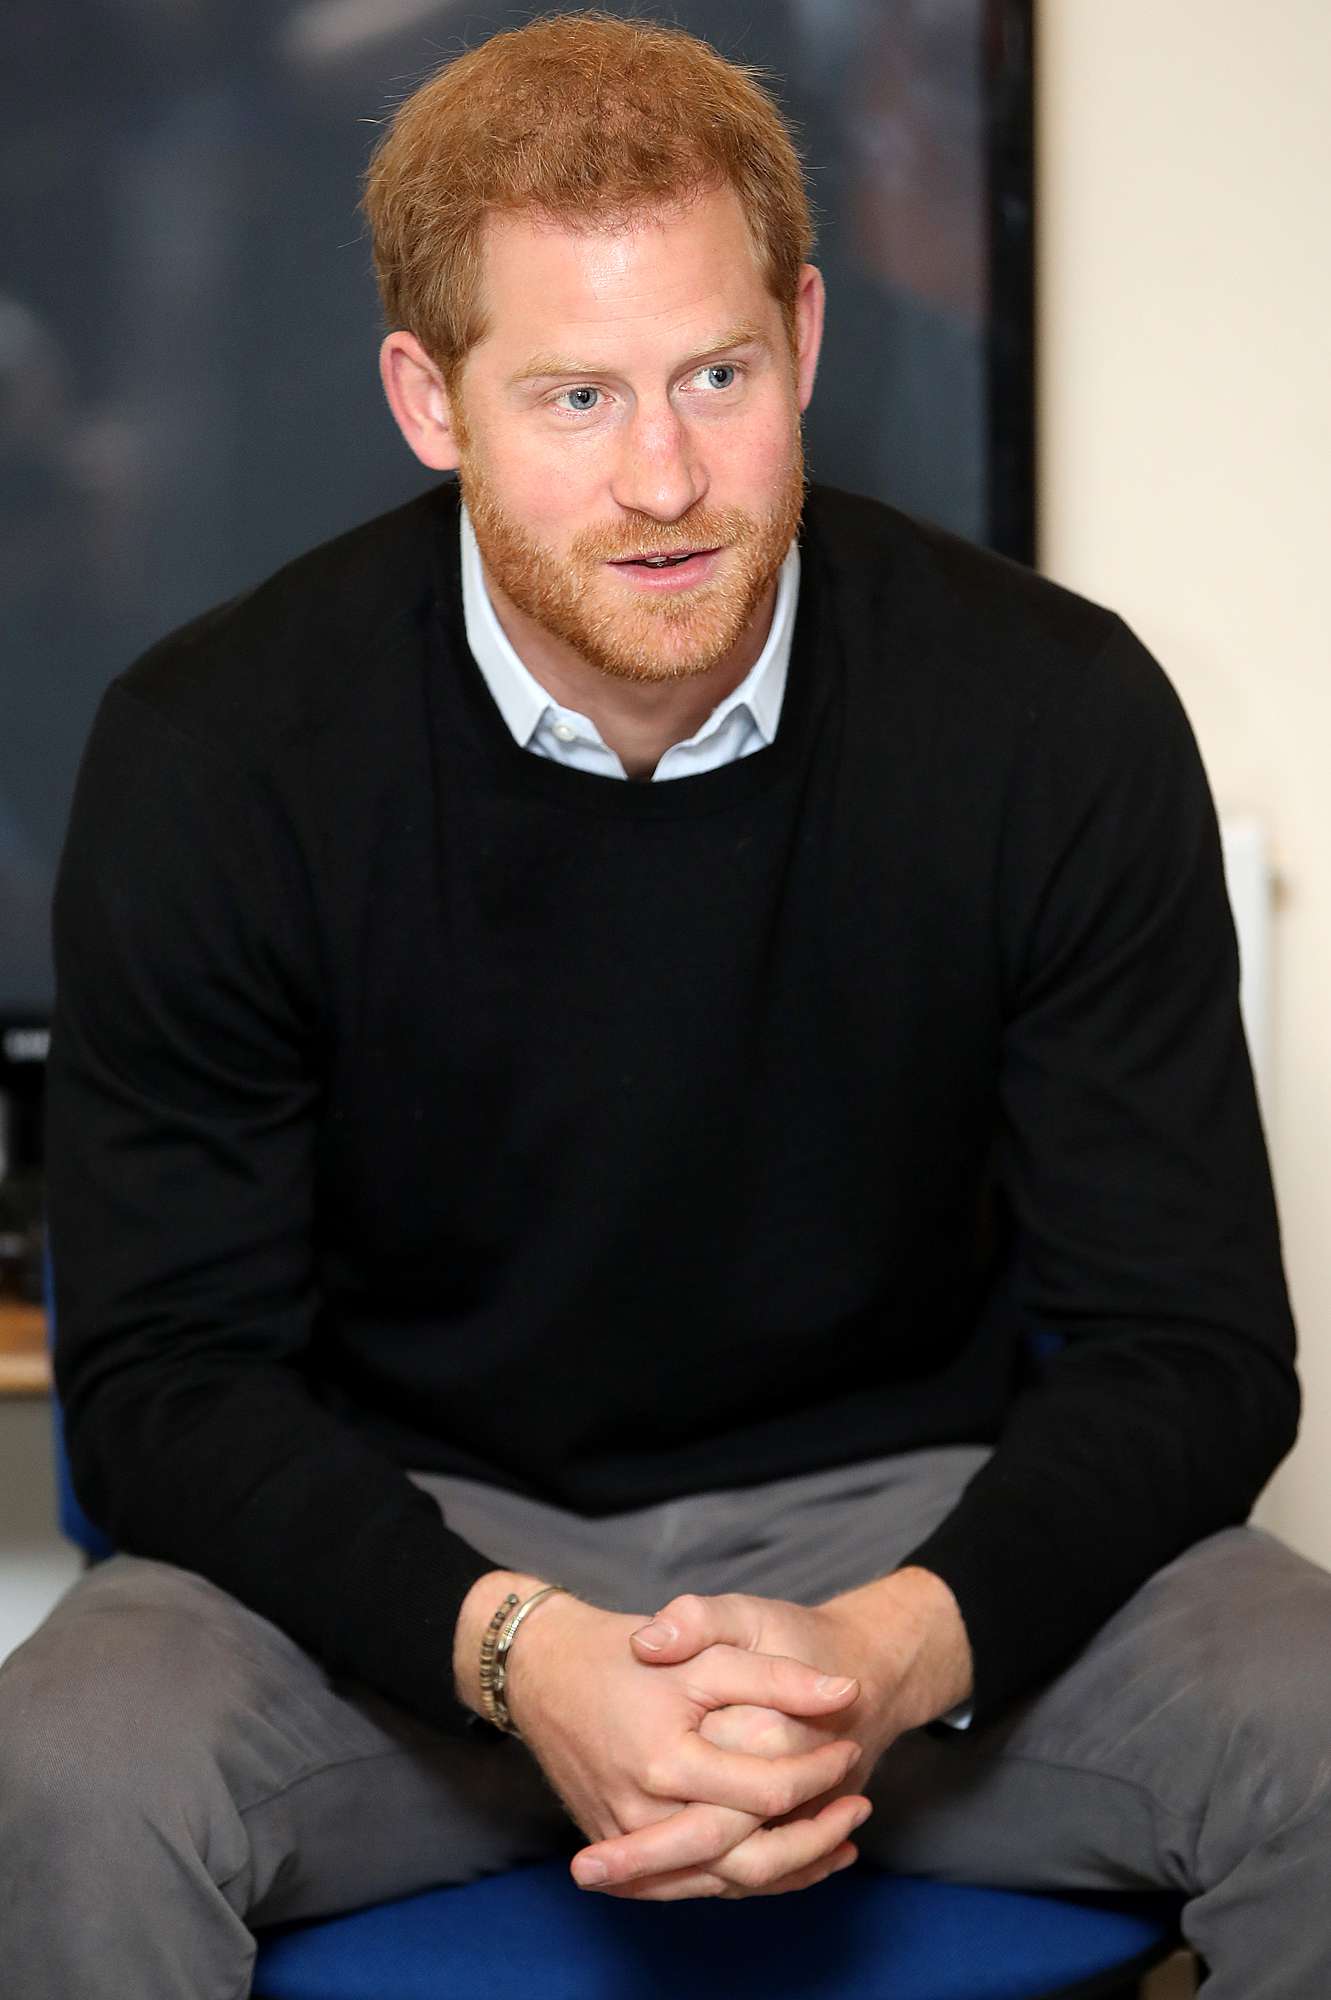 The Duke Of Sussex Visit The 'Fit And Fed' Half-Term Initiative